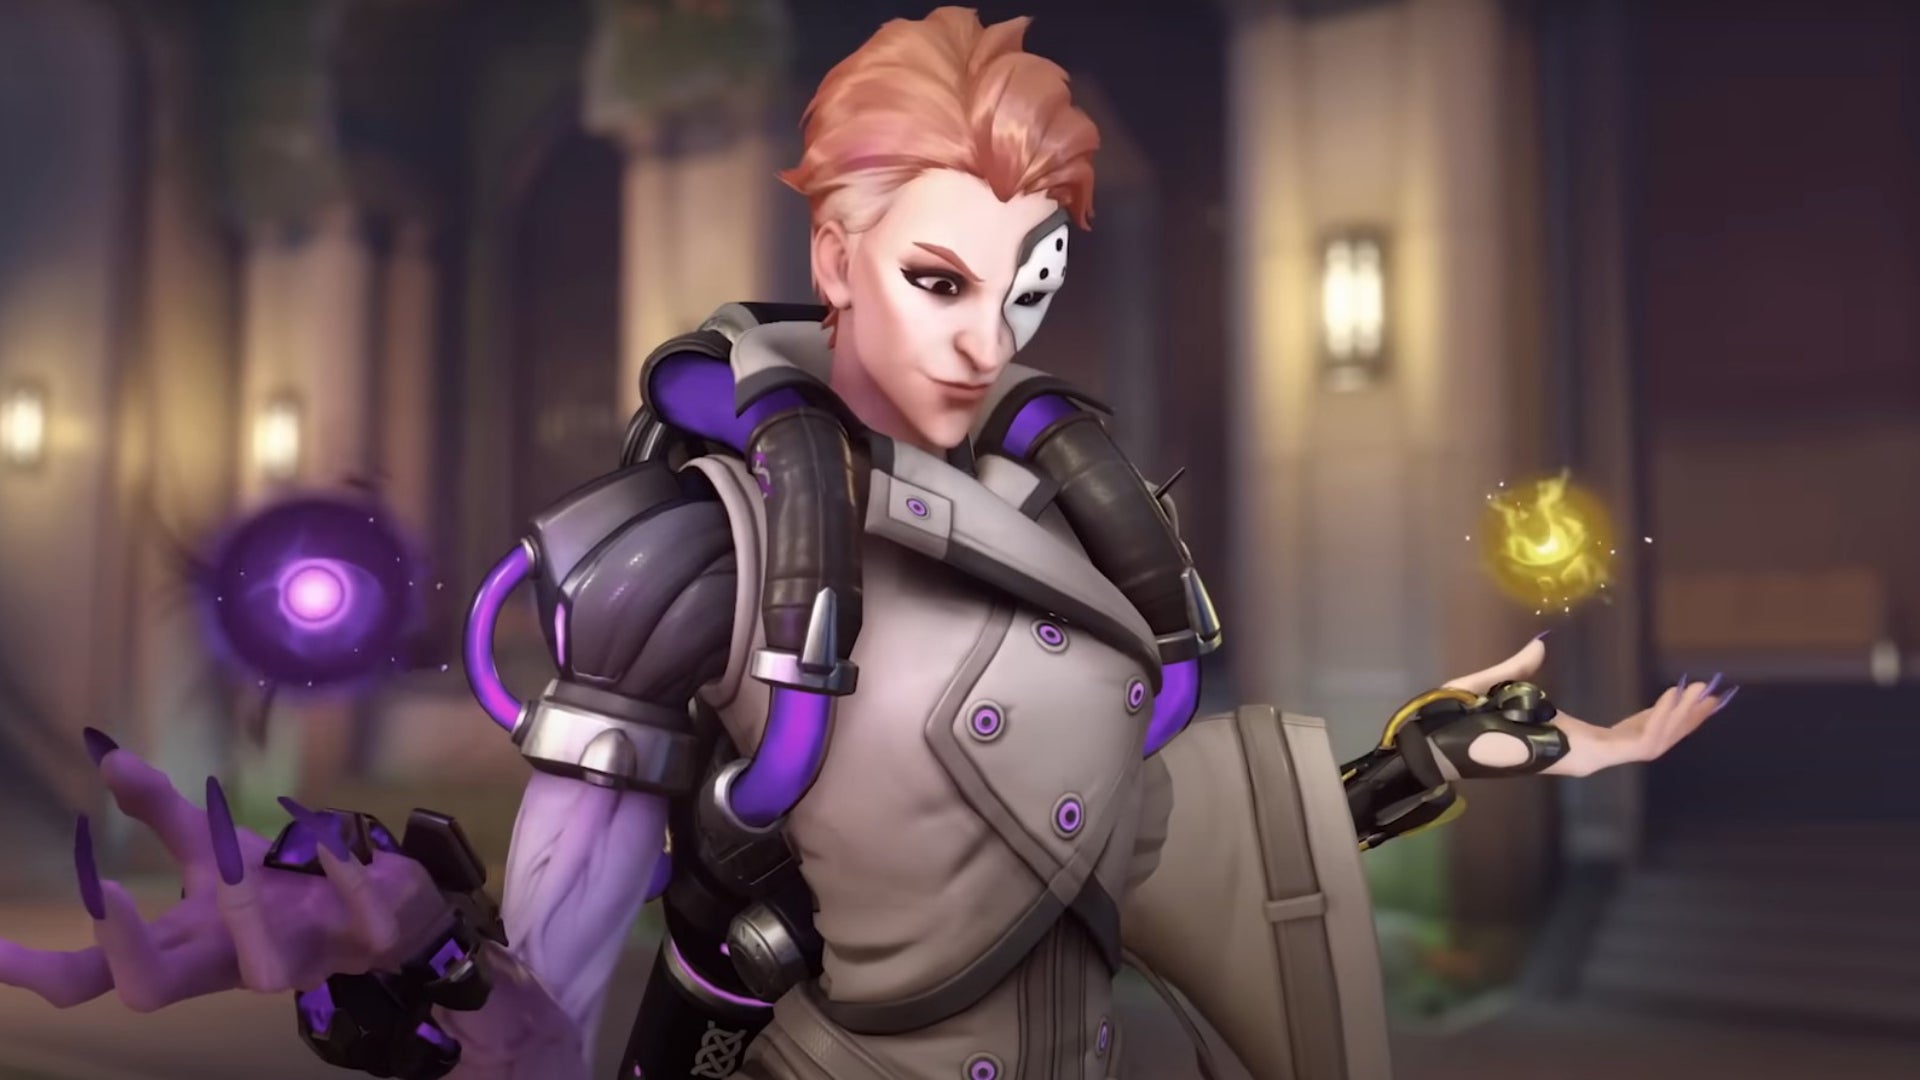 Mastering Moira in Overwatch 2 made me the best support player I